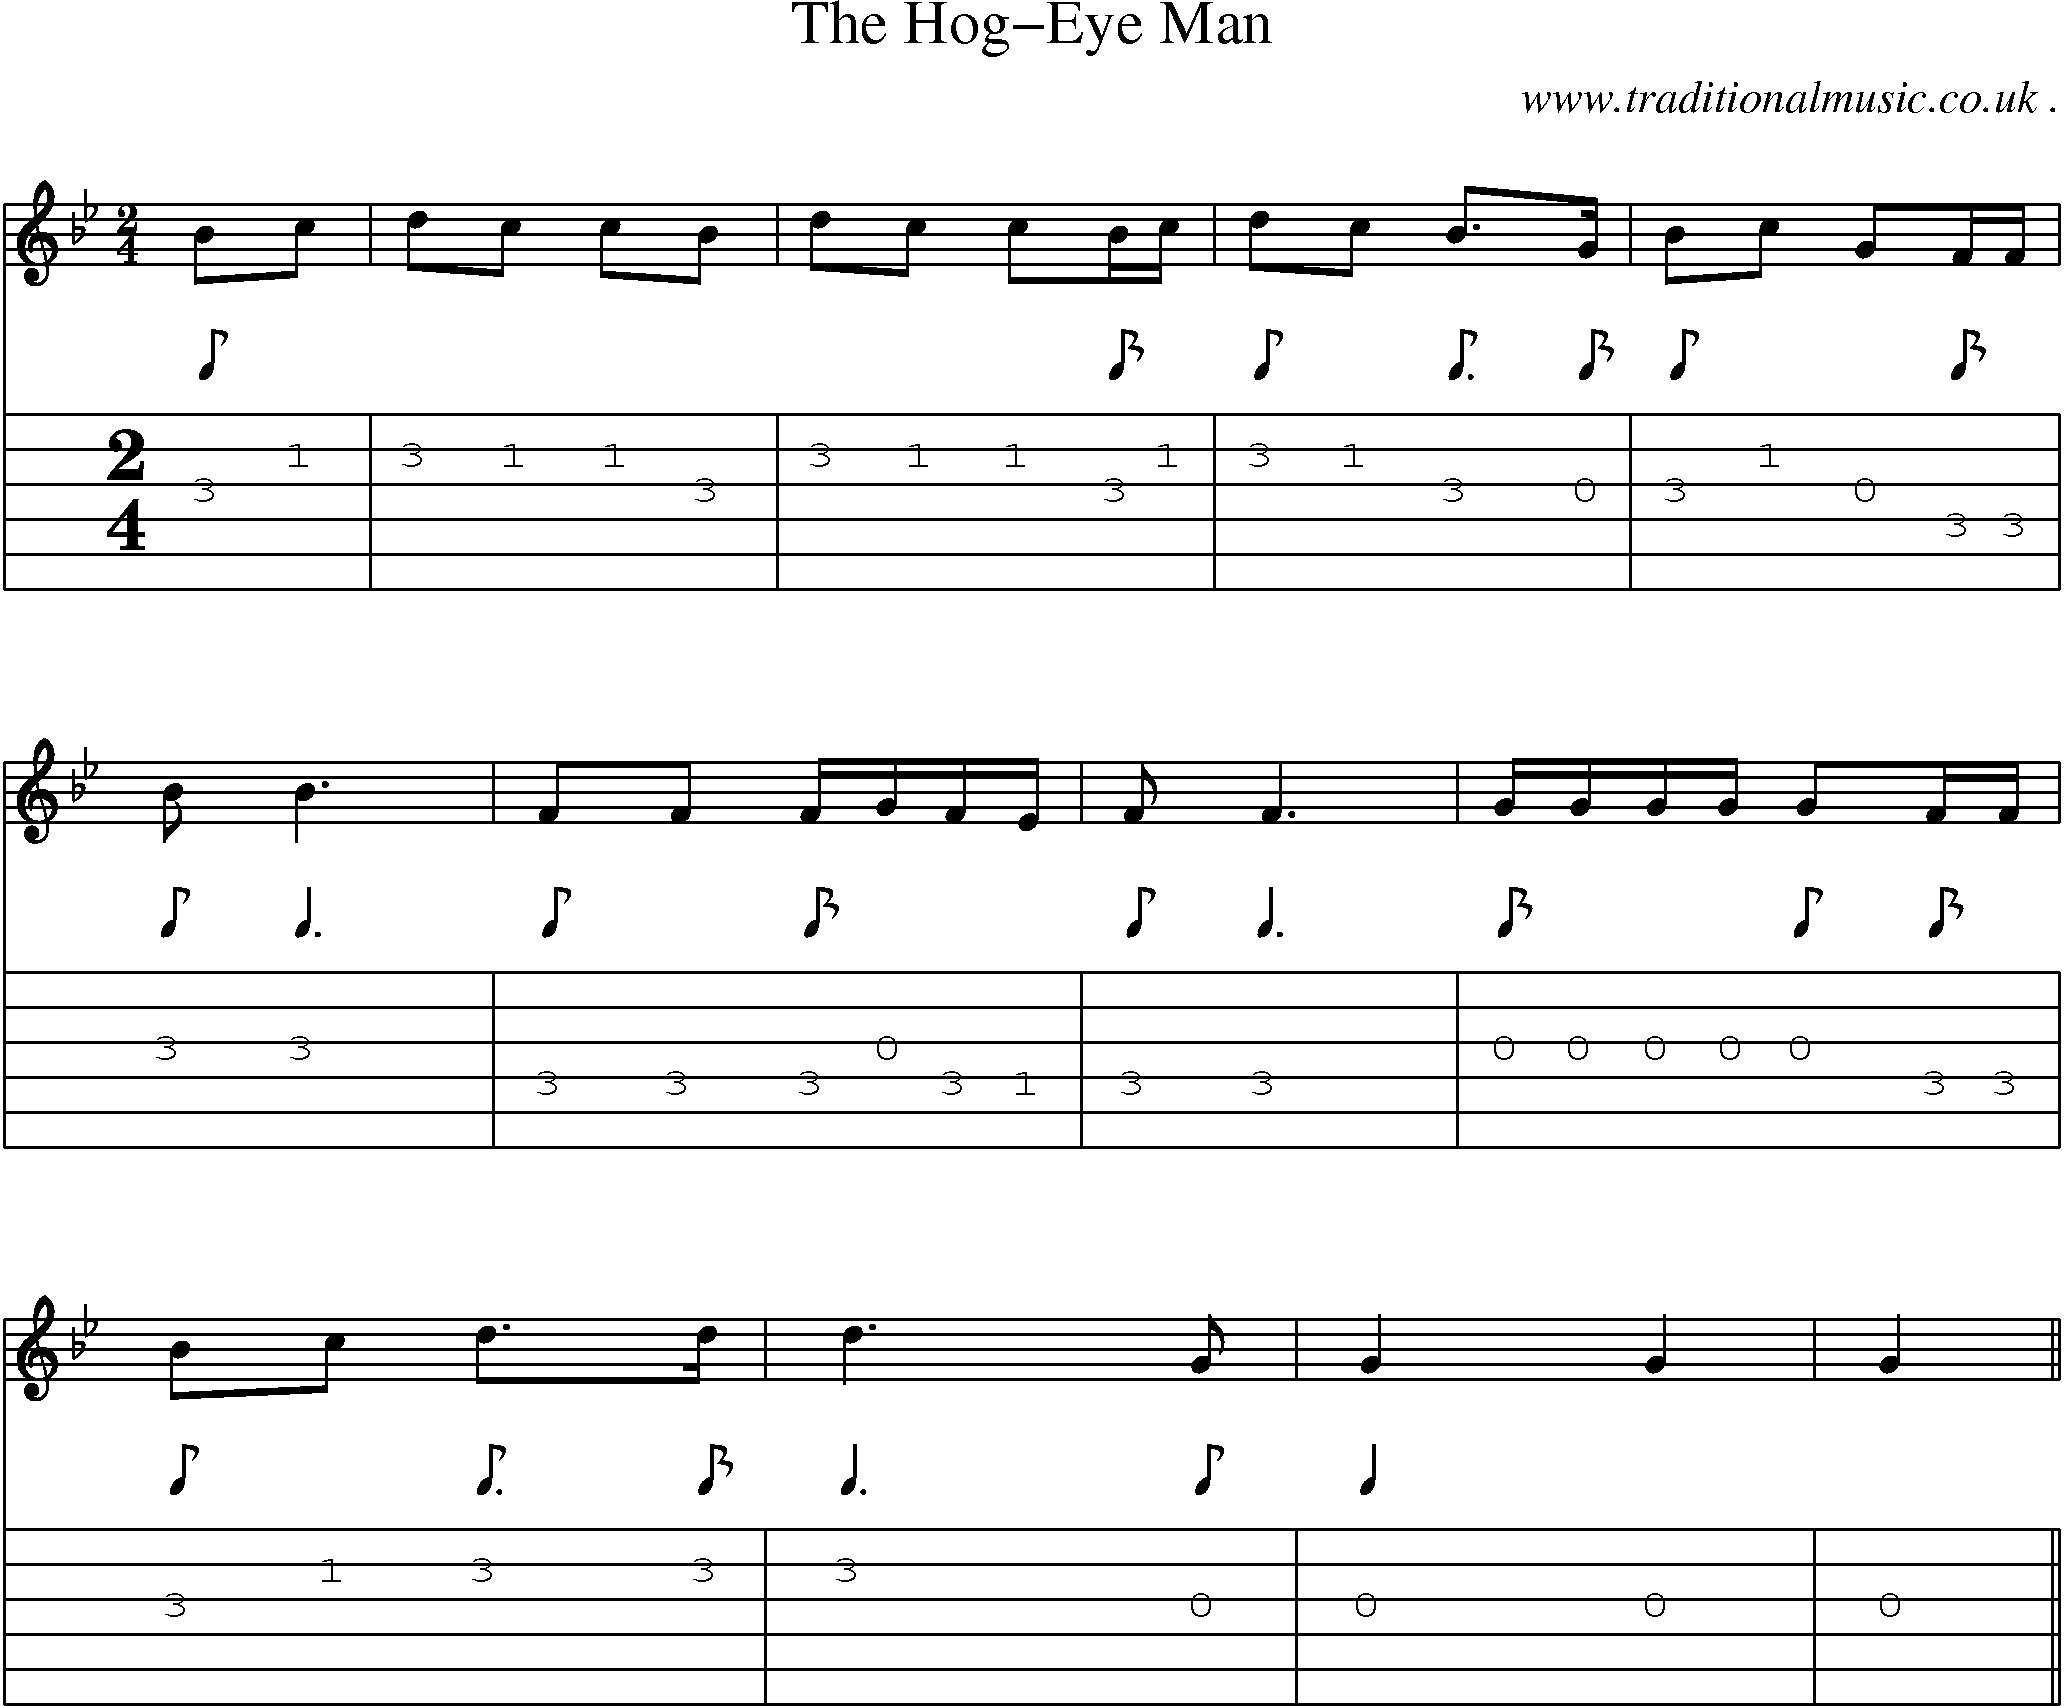 Sheet-Music and Guitar Tabs for The Hog-eye Man